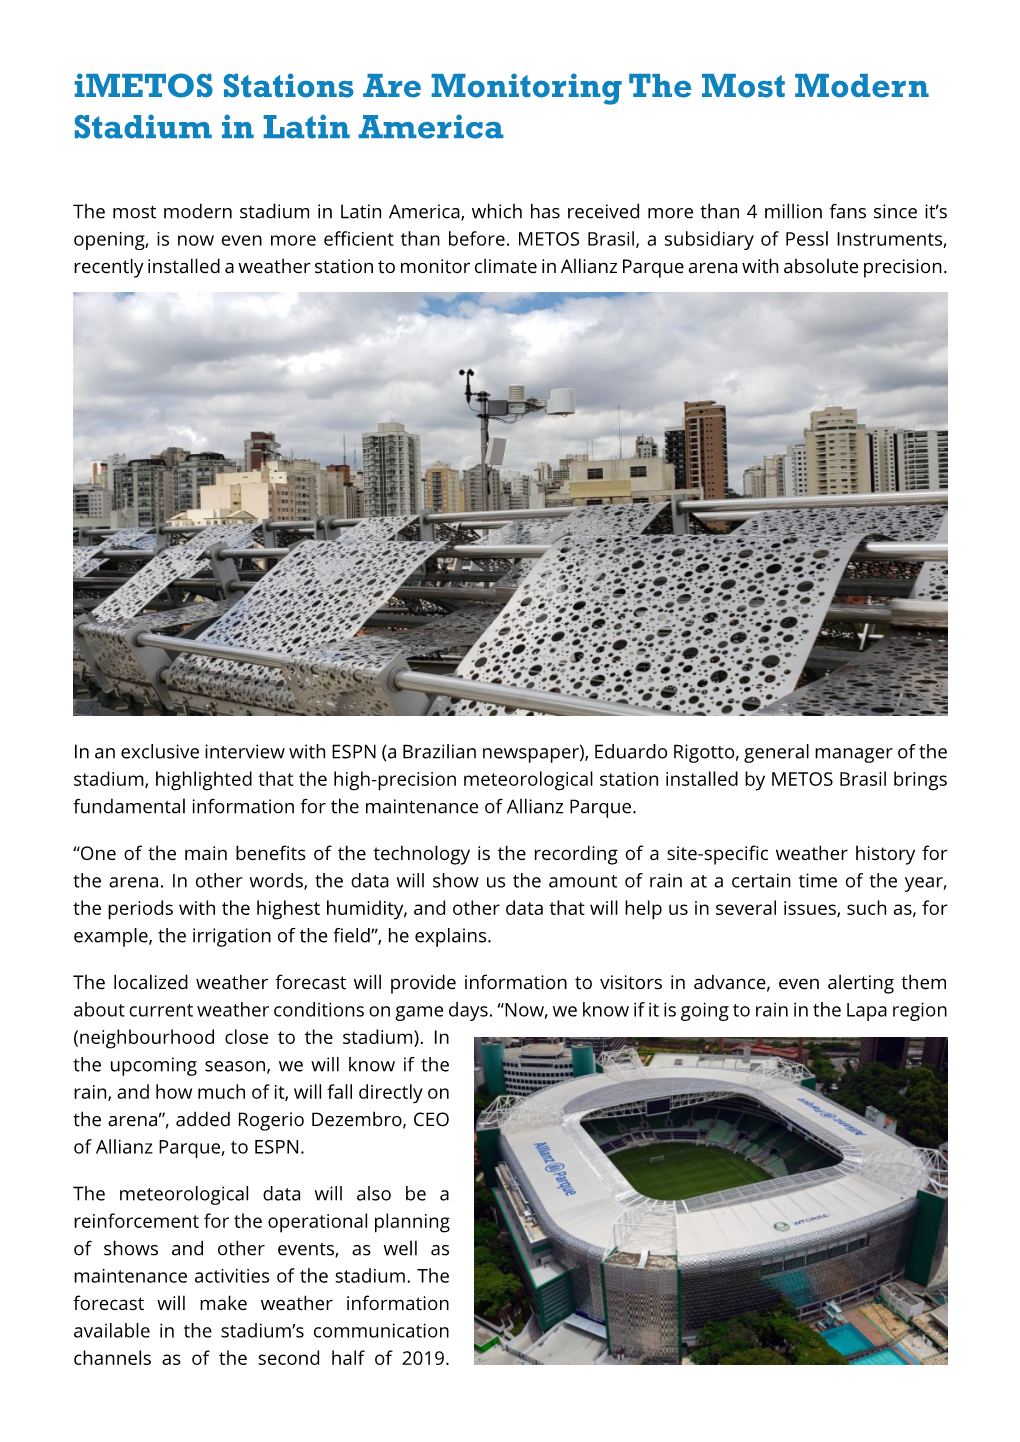 Imetos Stations Are Monitoring the Most Modern Stadium in Latin America